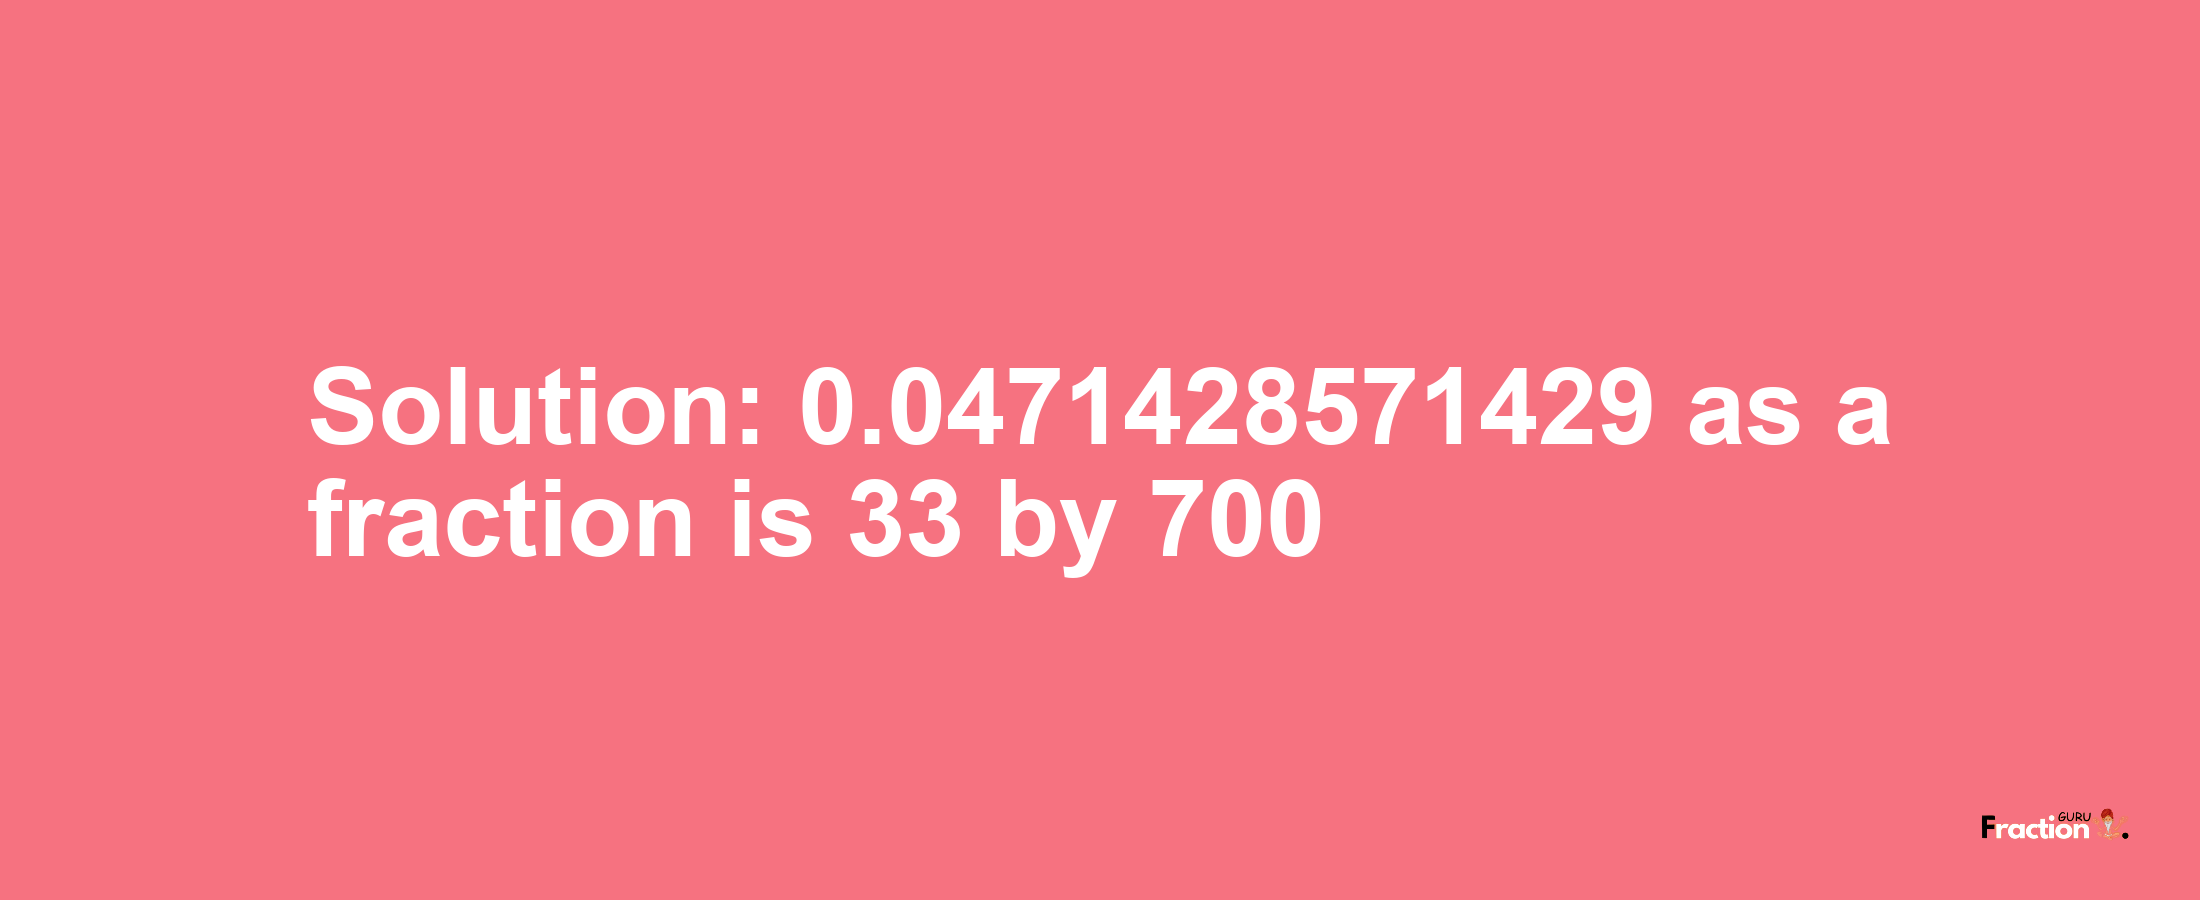 Solution:0.0471428571429 as a fraction is 33/700